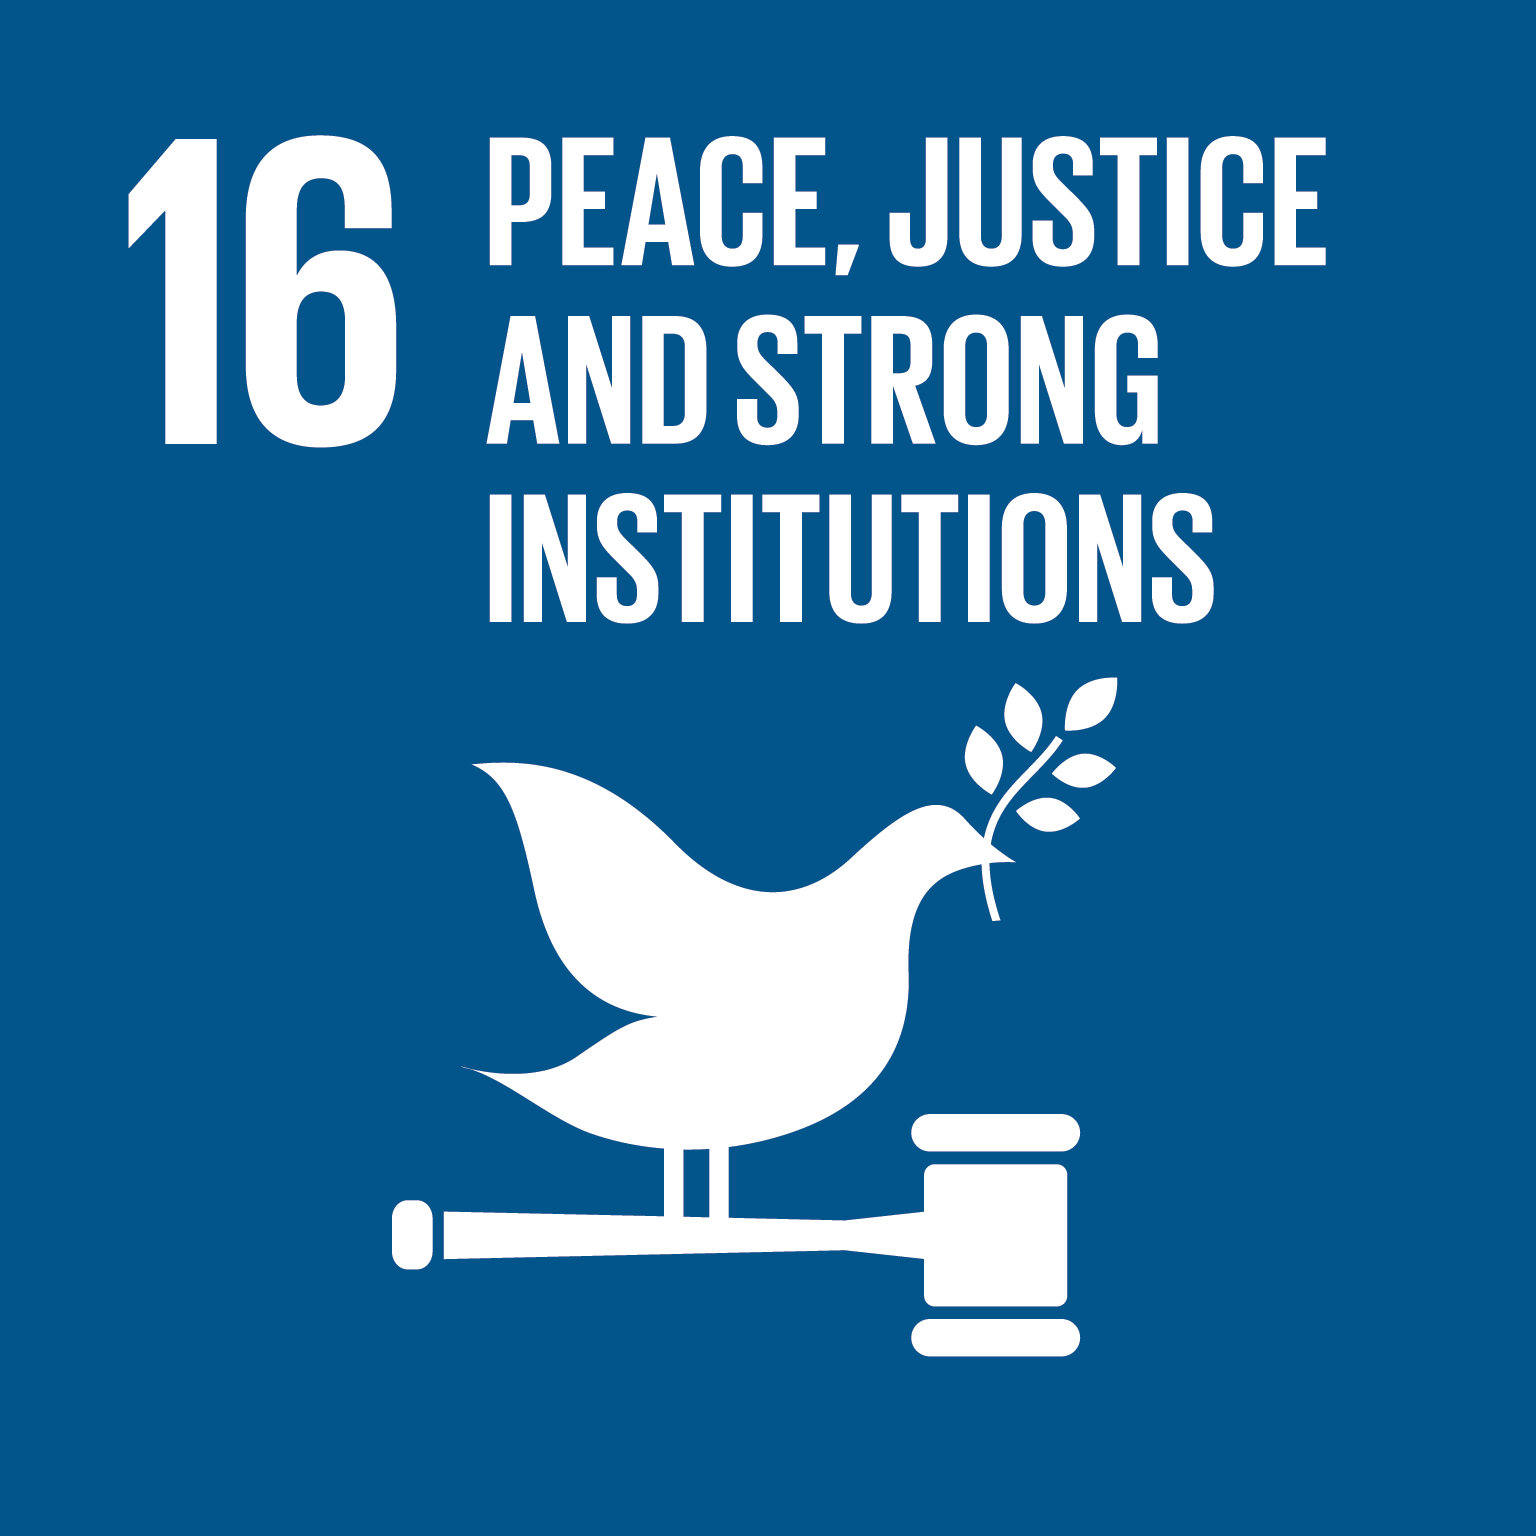 SDG 16 - Peace, Justice and strong institutions